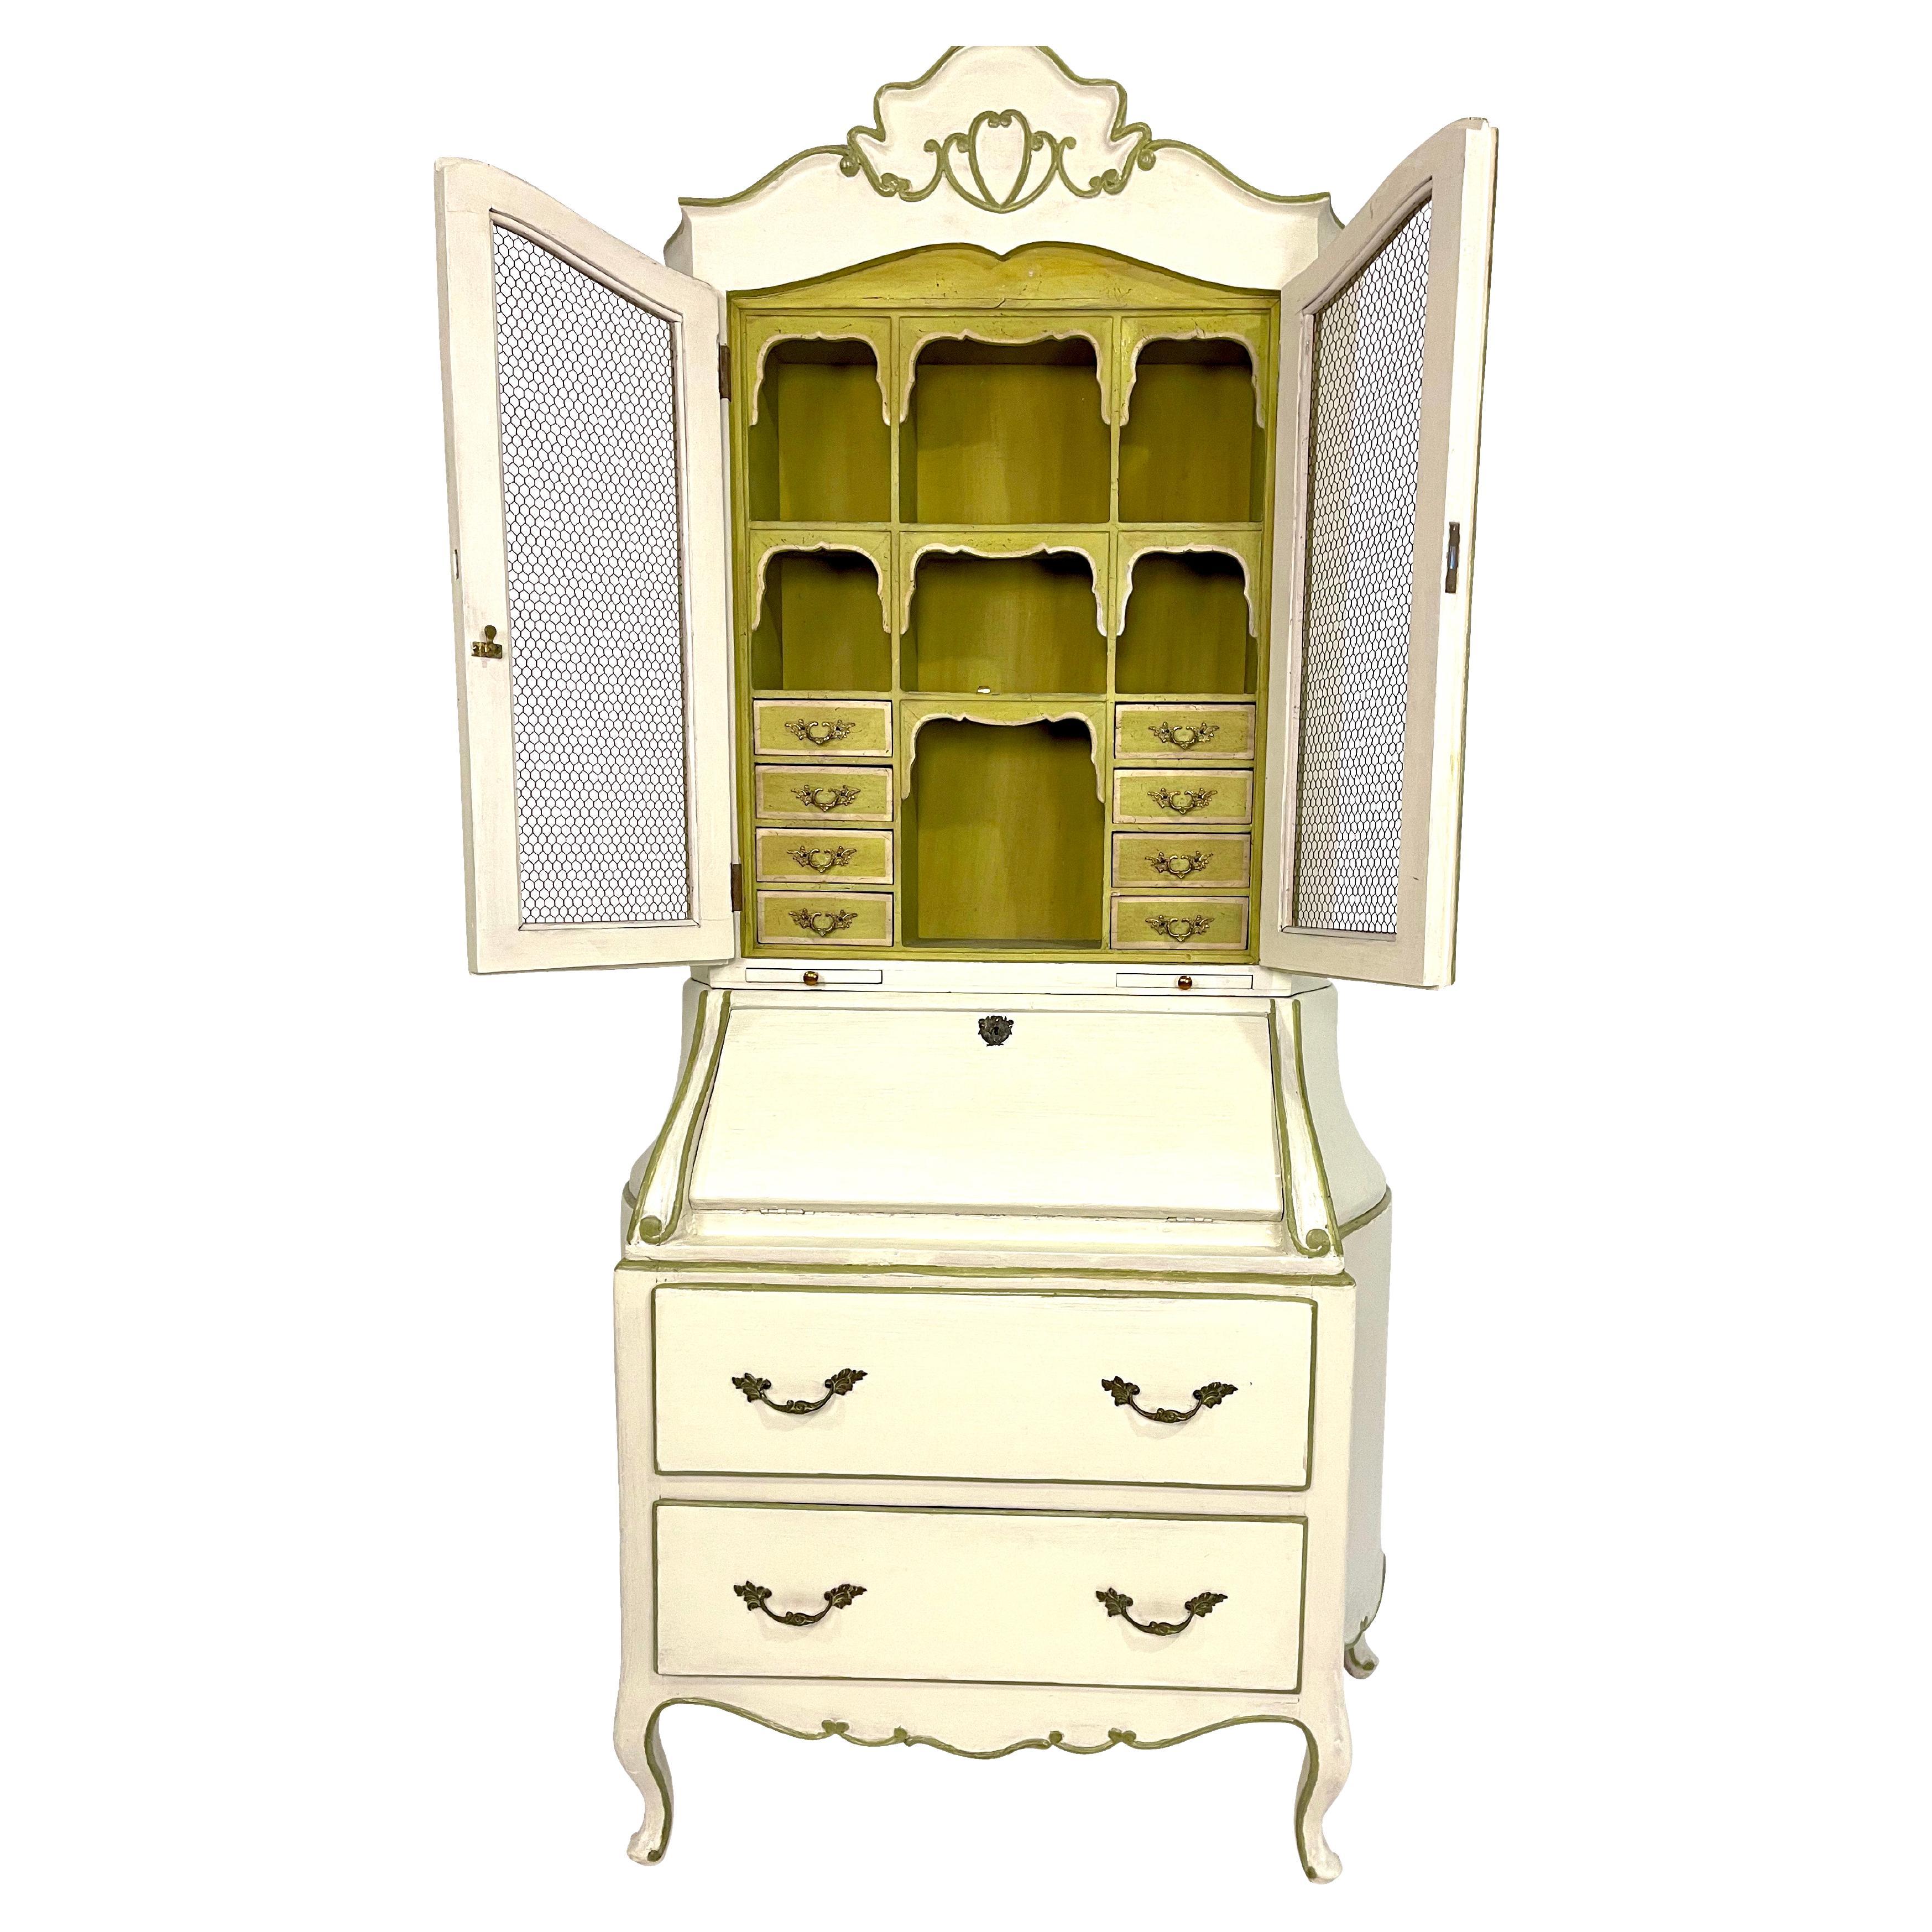 In an all-over ivory paint with a wonderful light green interior throughout this beautiful turn of the century, a French provincial secretary/desk came out of a New York City Park Avenue apartment. This lovely drop-front desk reveals four small